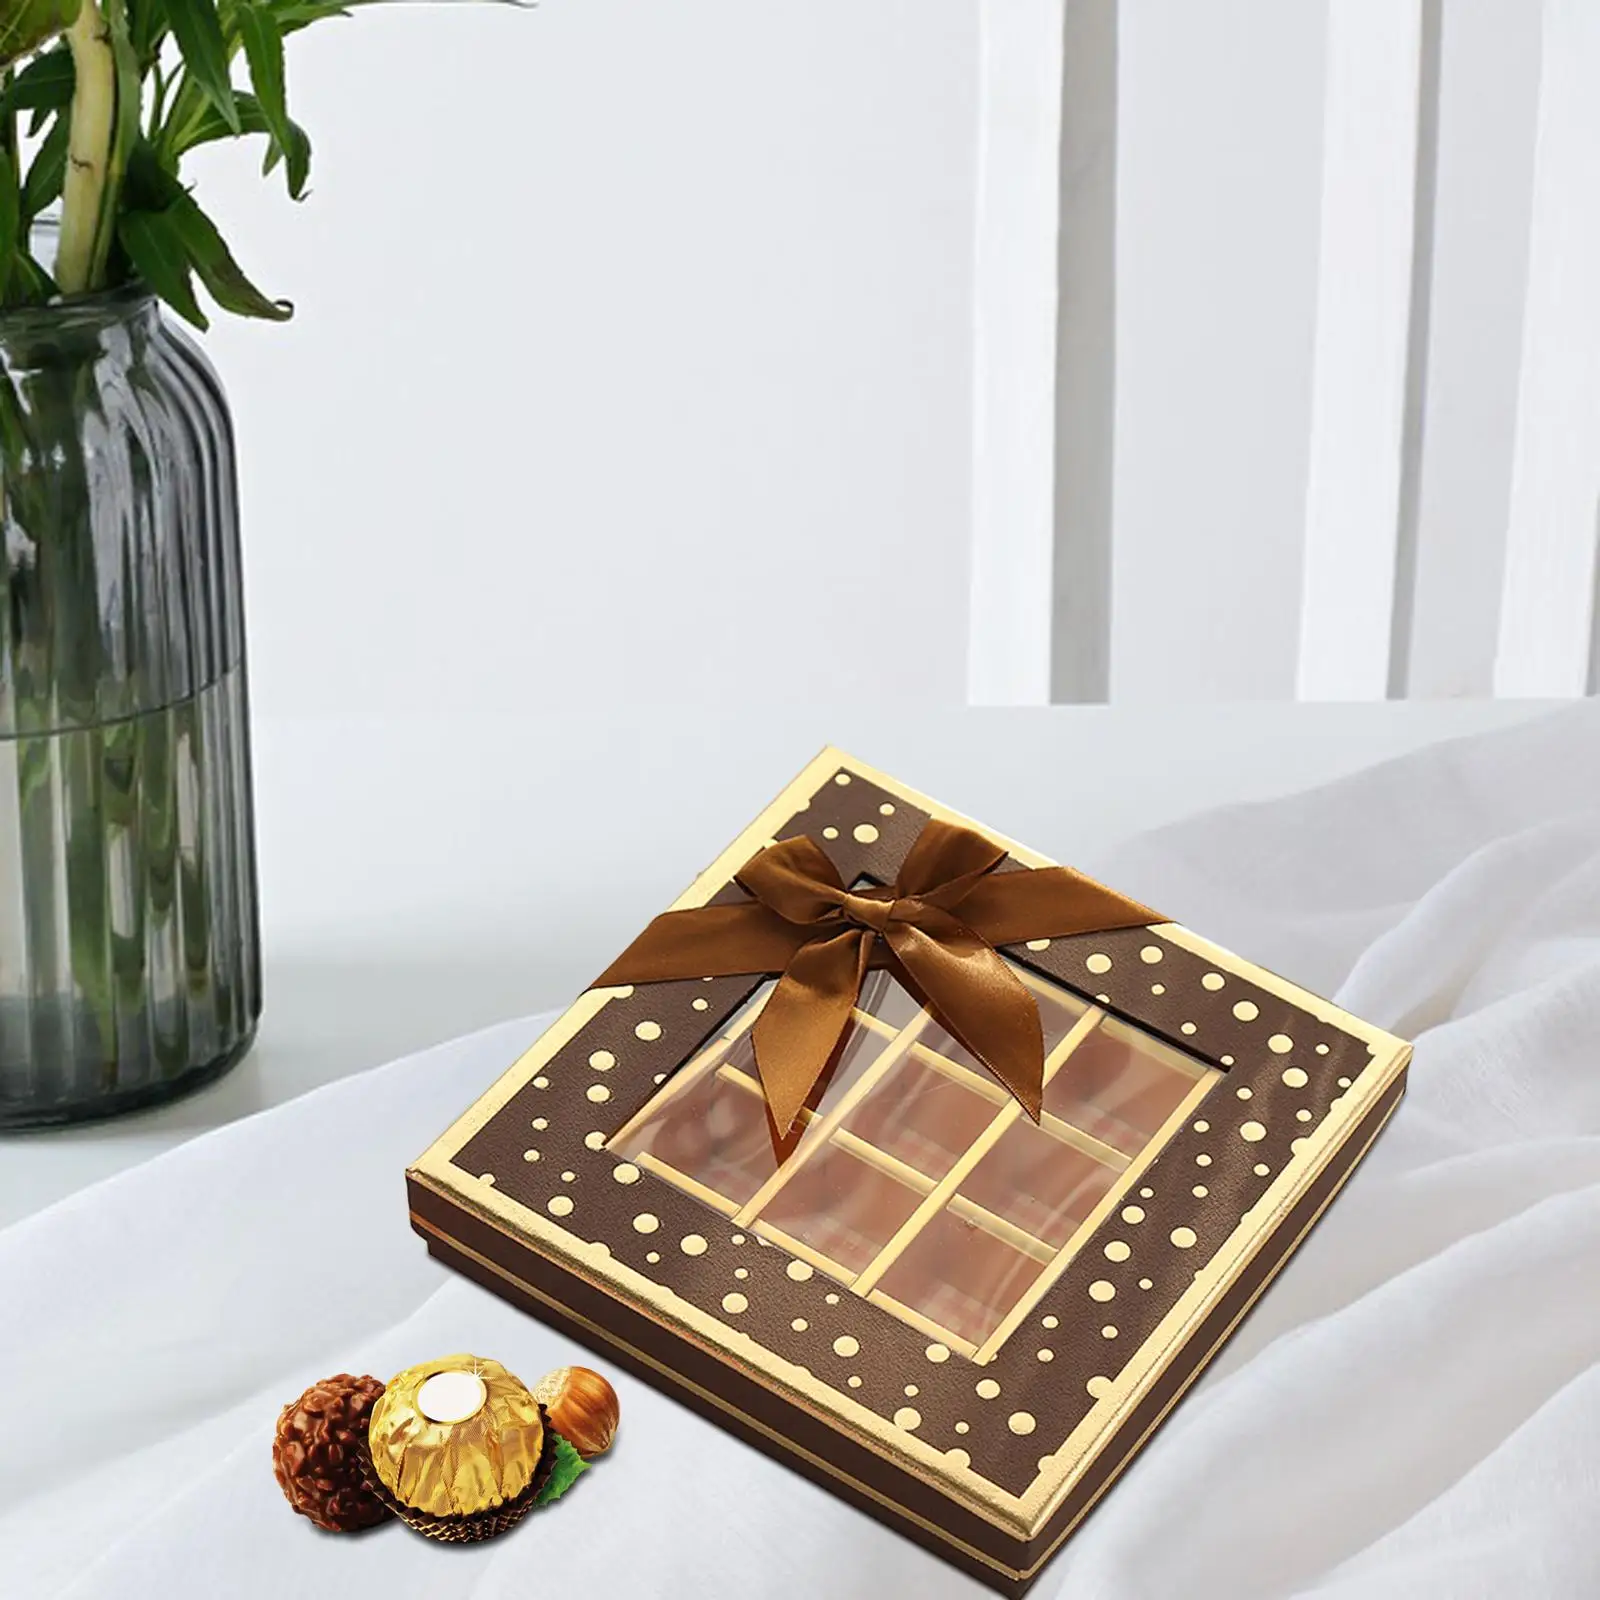 Chocolate Box 25 Inner Grids Valentines Day Gift Box for Girlfriend Boyfriend Family Members Wife Husband Wedding Party Supplies